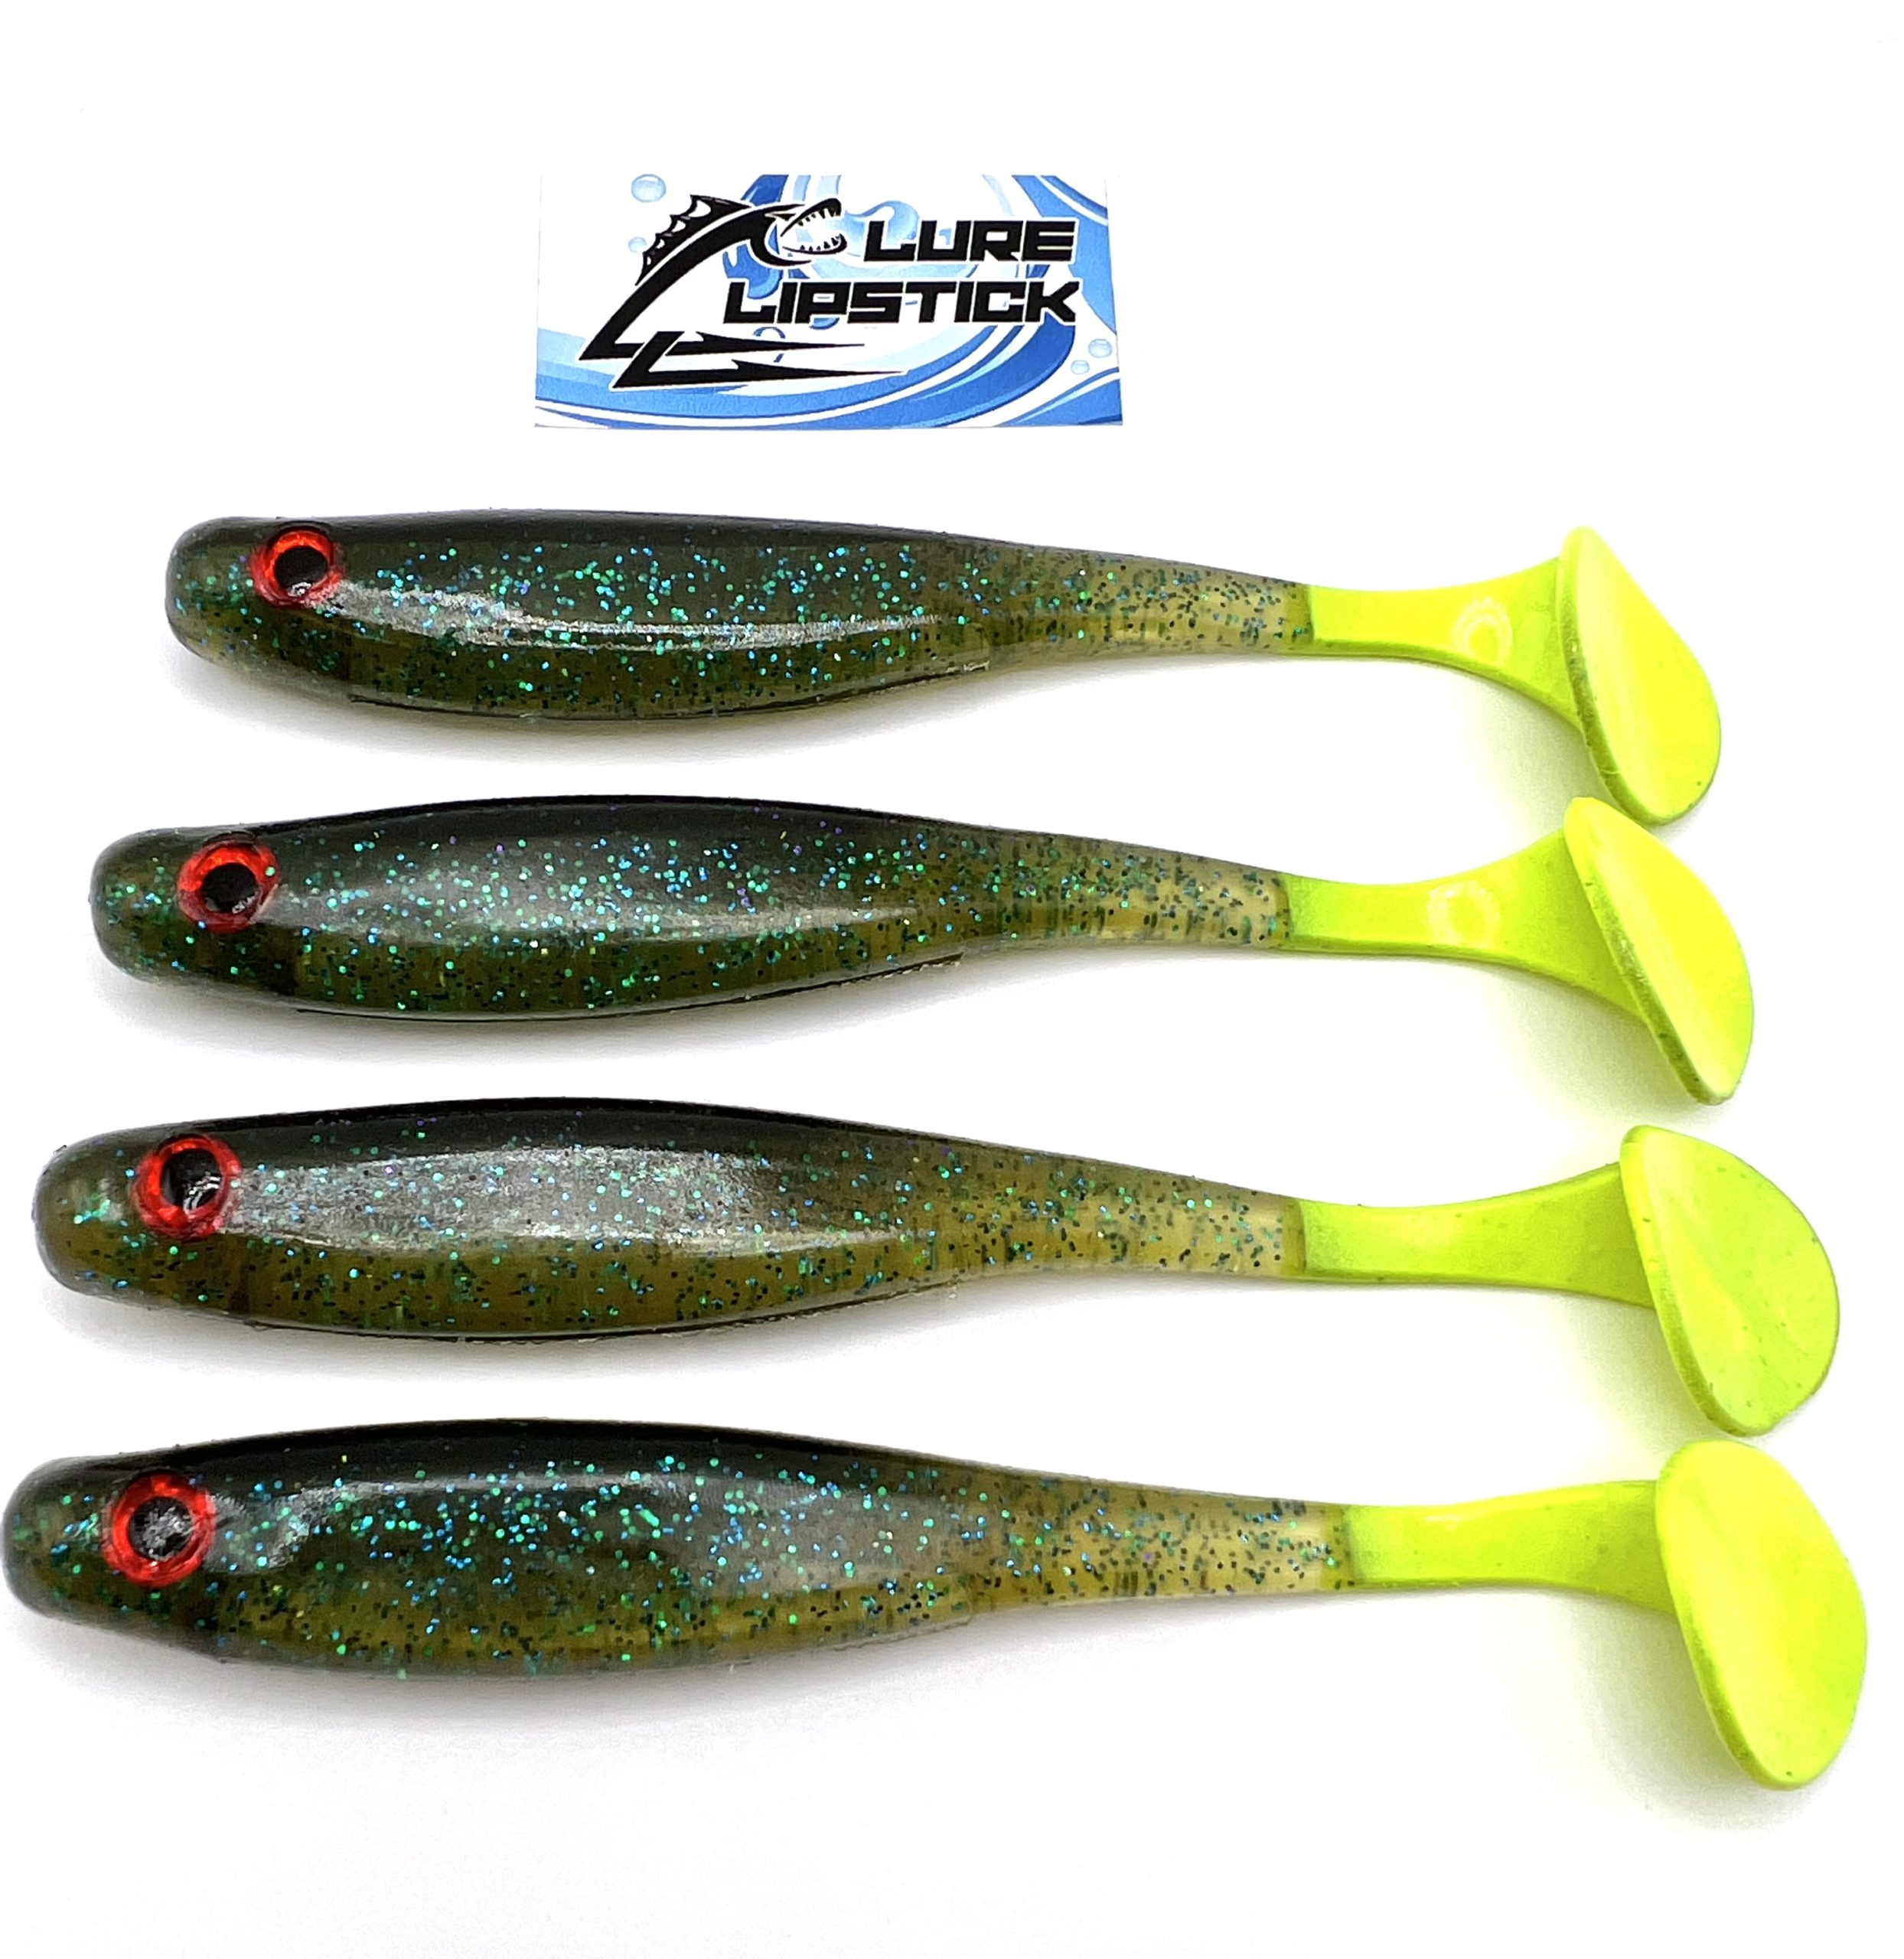 5″ SUICIDE SHAD PADDLE TAIL SWIMBAIT – QTY 4 PK – SPRAYED GRASS CHARTREUSE  TAIL – Lure Lipstick